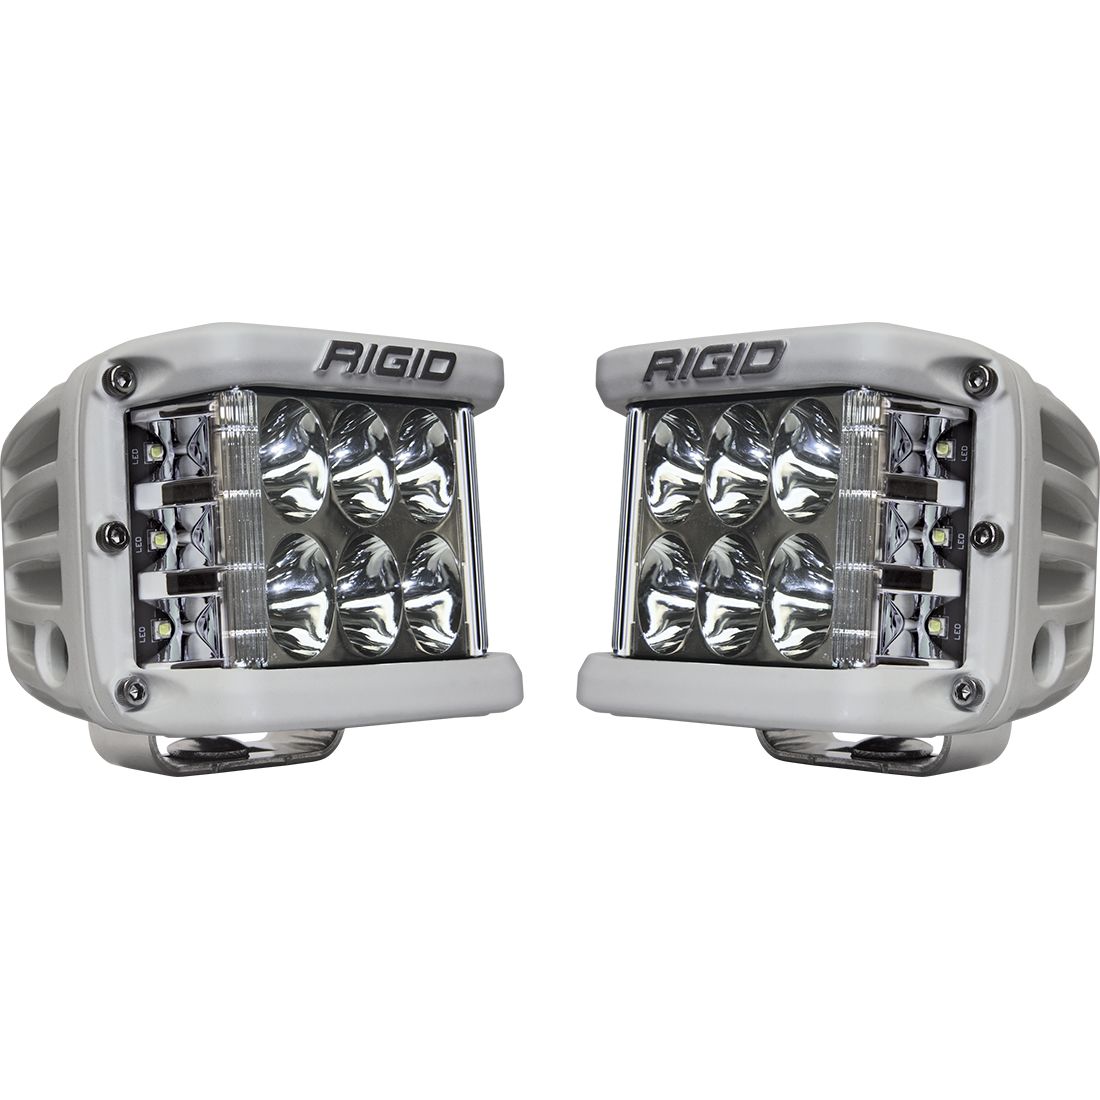 Rigid Industries D-SS Series Pro WHITE CASE SIDESHOOTERS (SOLD IN PAIRS)